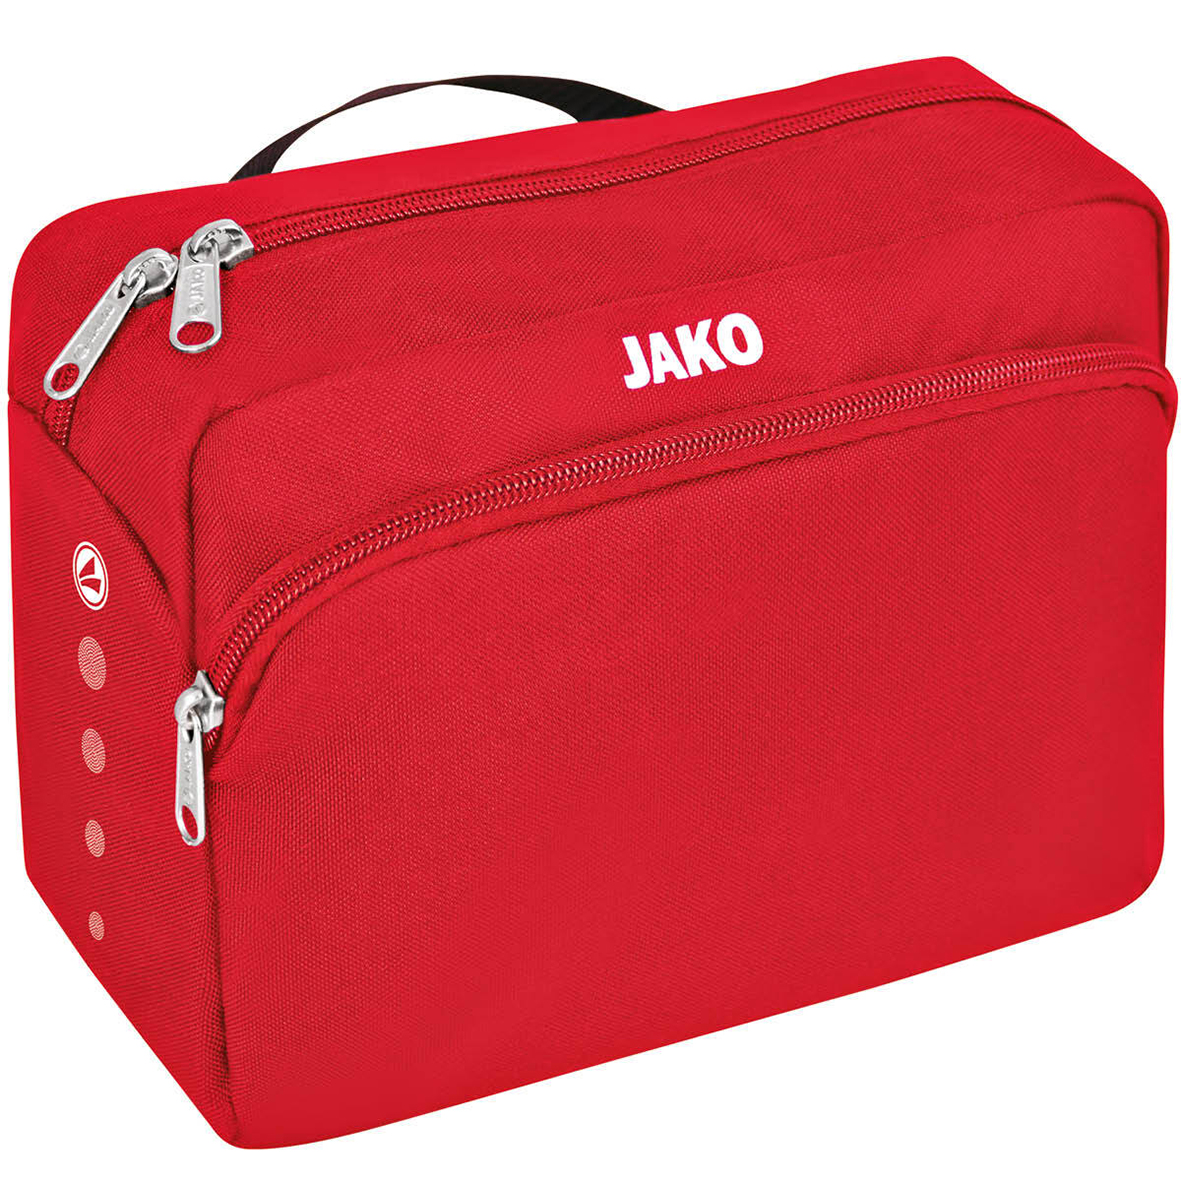 PERSONAL BAG JAKO CLASSICO, RED.